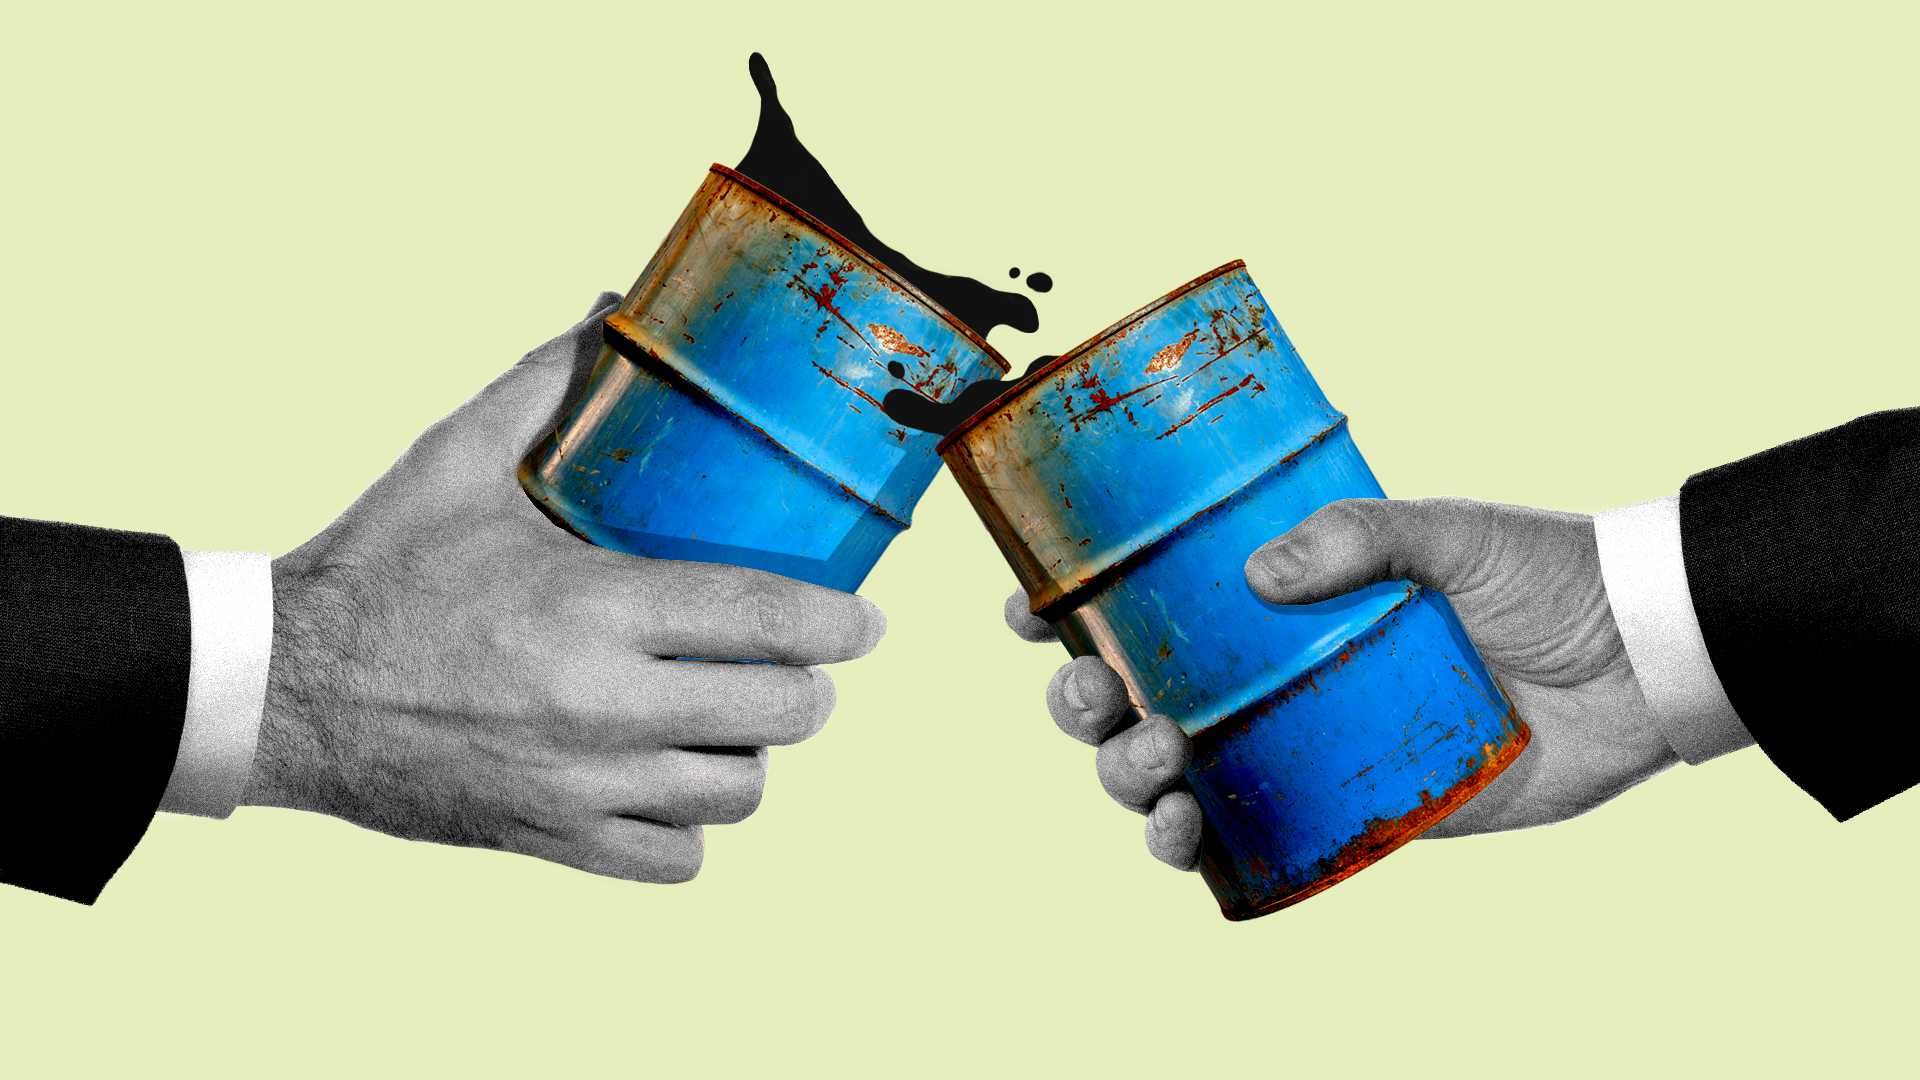 Illustration of two hands toasting but with oil barrels instead of glasses